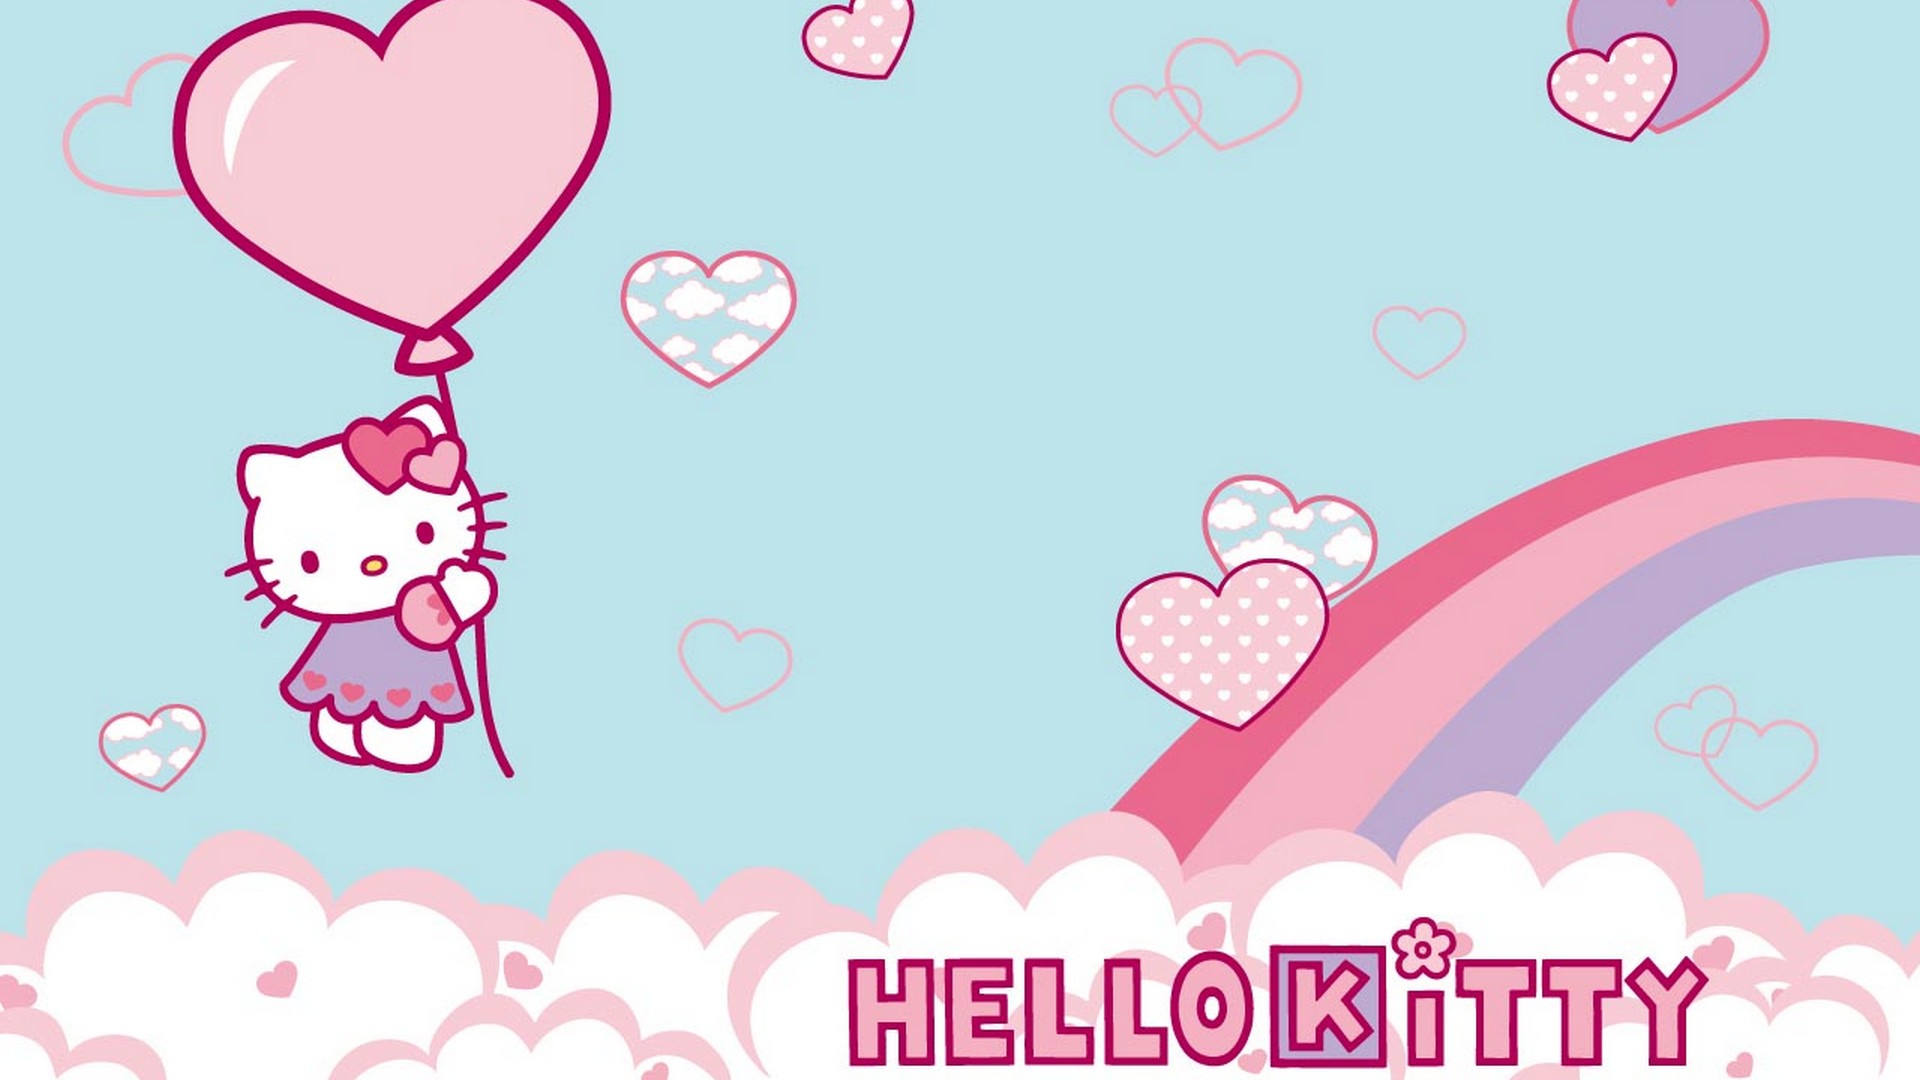 Wallpaper Hello Kitty Images Desktop with resolution 1920X1080 pixel. You can use this wallpaper as background for your desktop Computer Screensavers, Android or iPhone smartphones